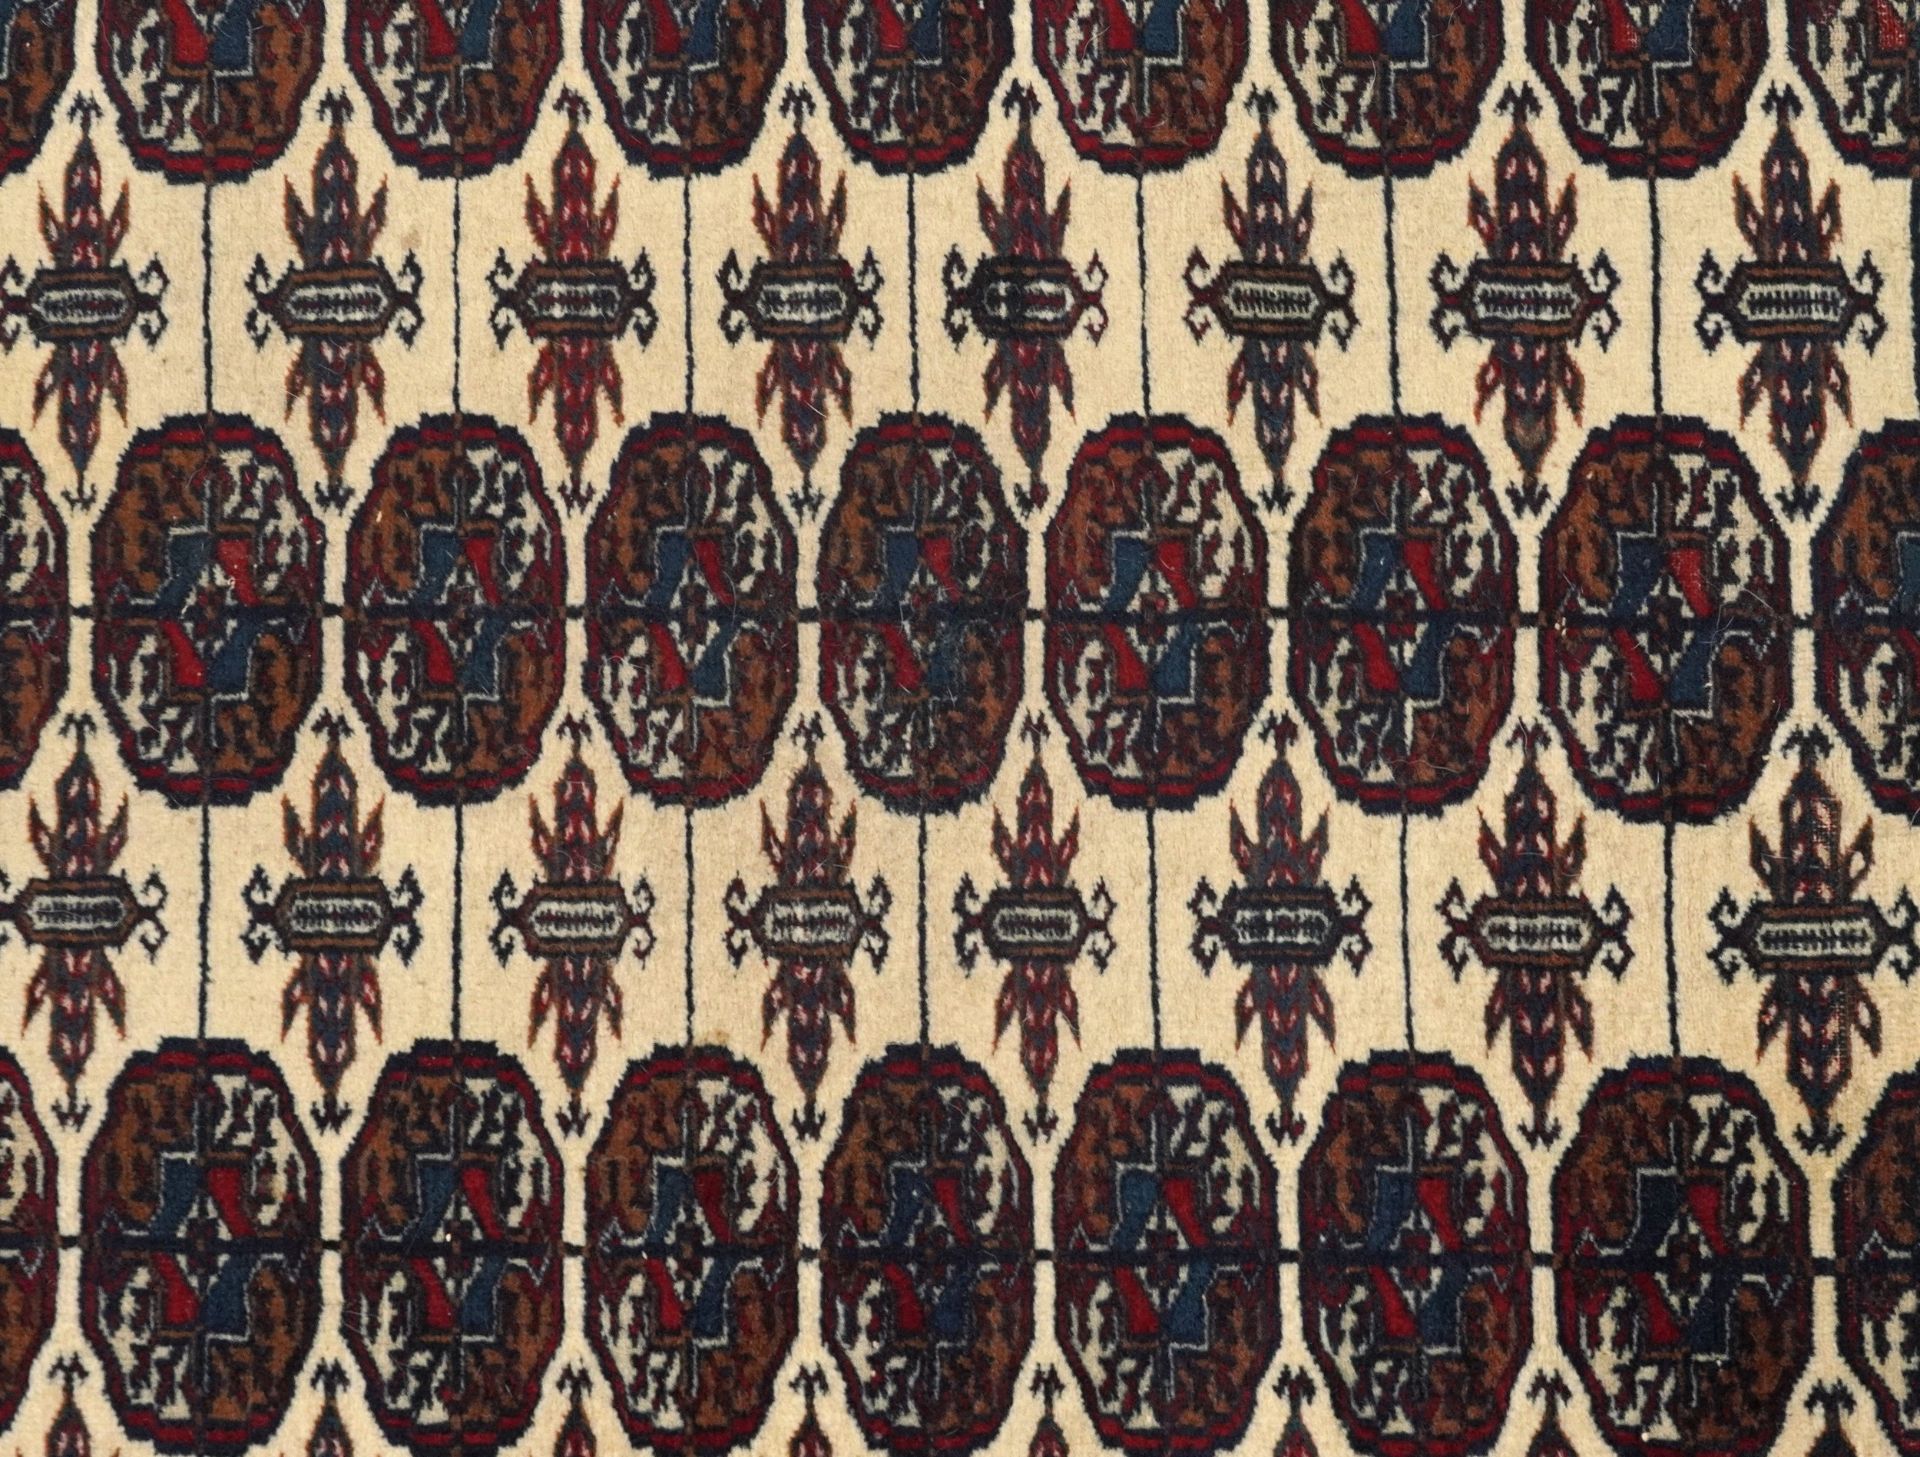 Rectangular Afghan Turkman rug having an allover repeat design, 185cm x 120cm : For further - Image 2 of 4